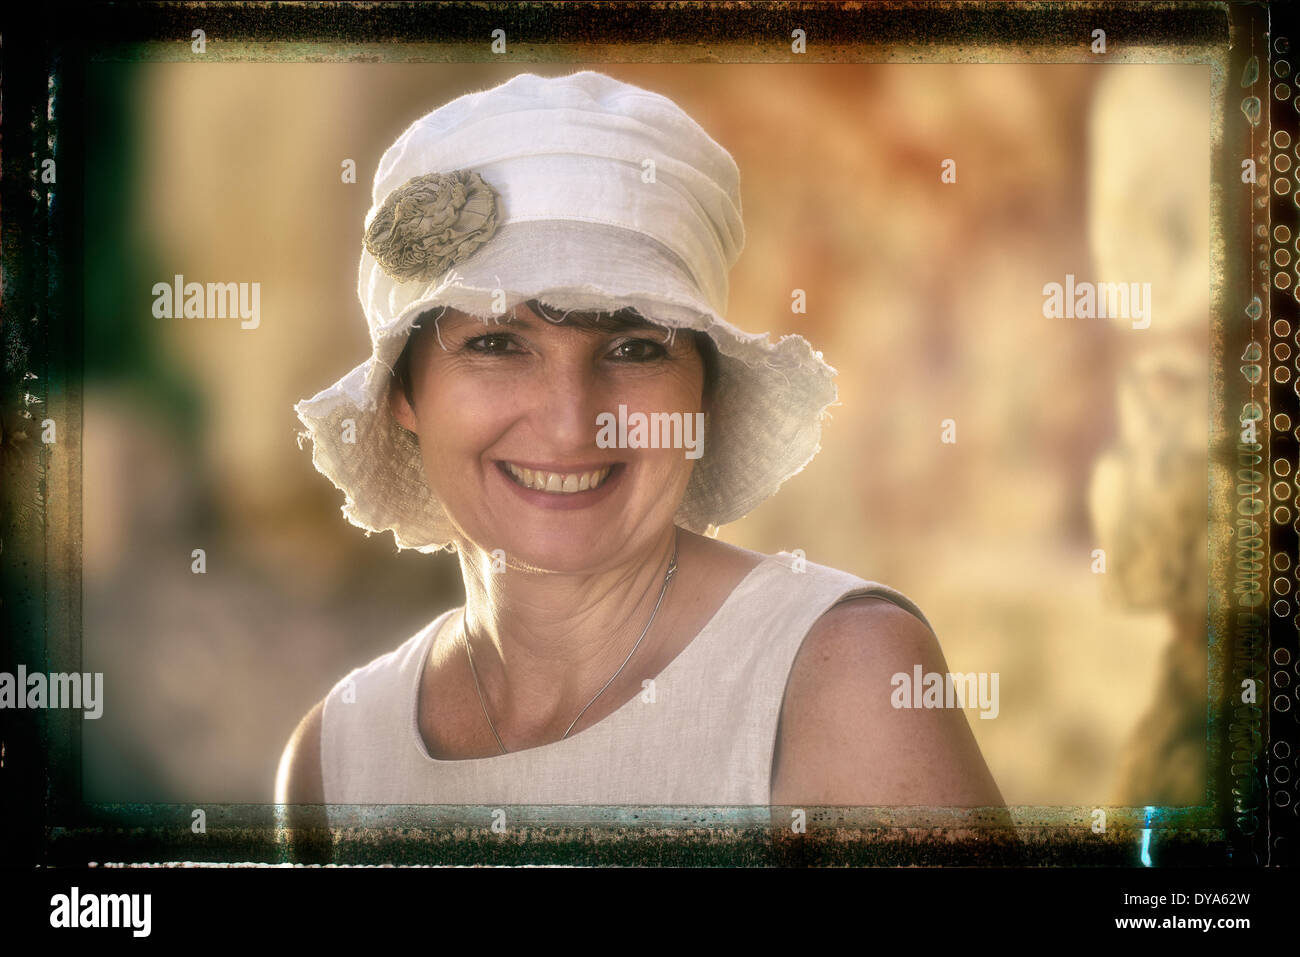 France, woman, portrait, smile, french, released, vintage, hat, nostalgic, old Stock Photo